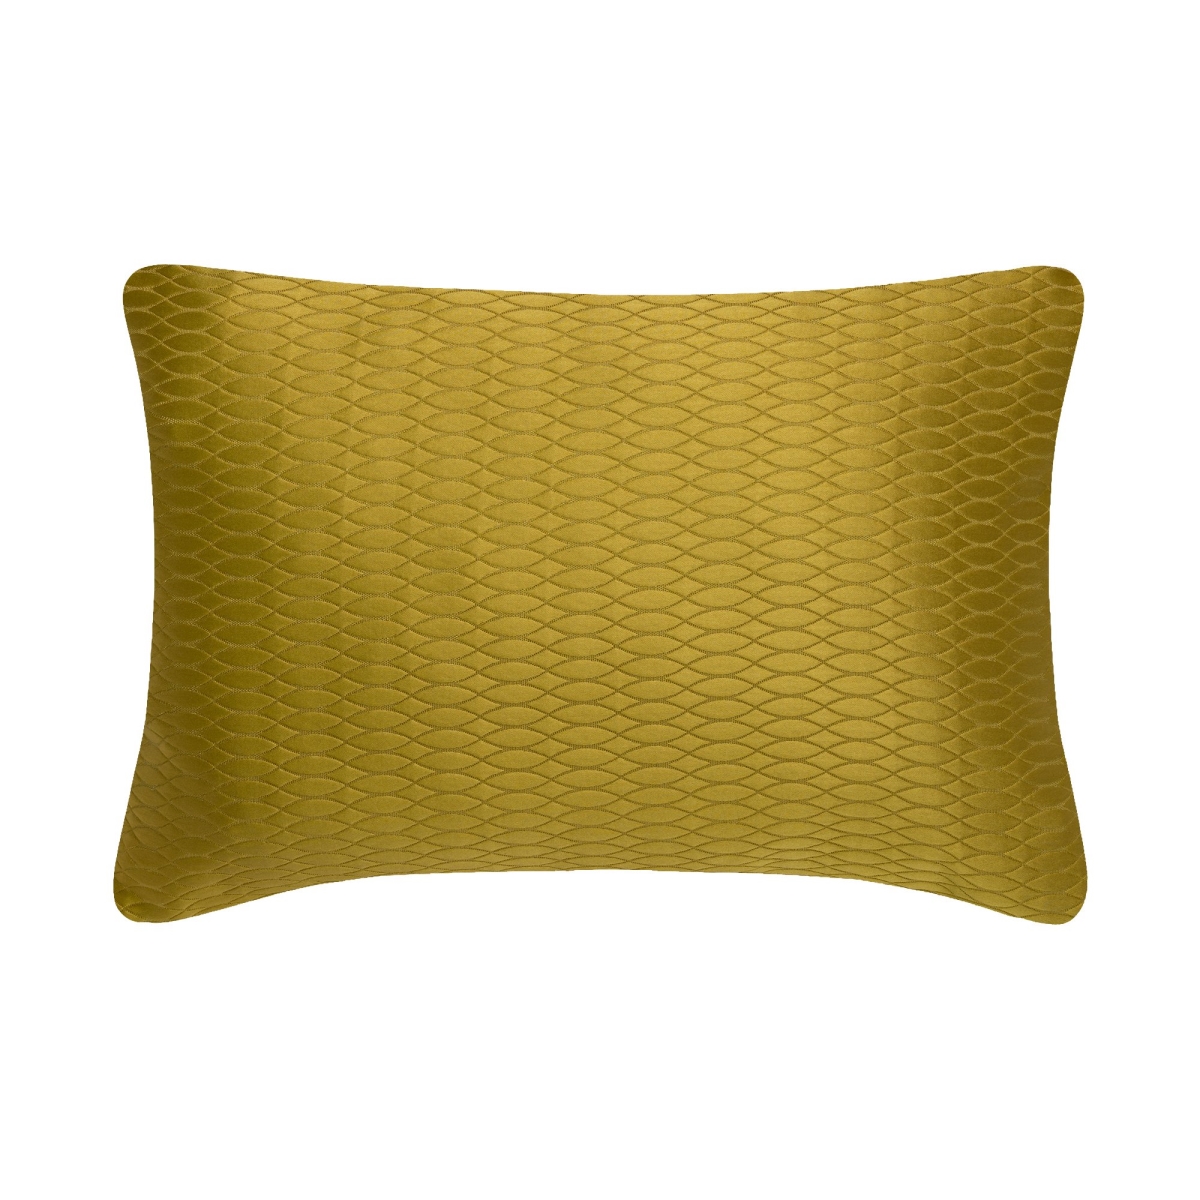 14 X 18 In. Biscay Boudoir Decorative Cushion, Gold - 100 Percent Polyester